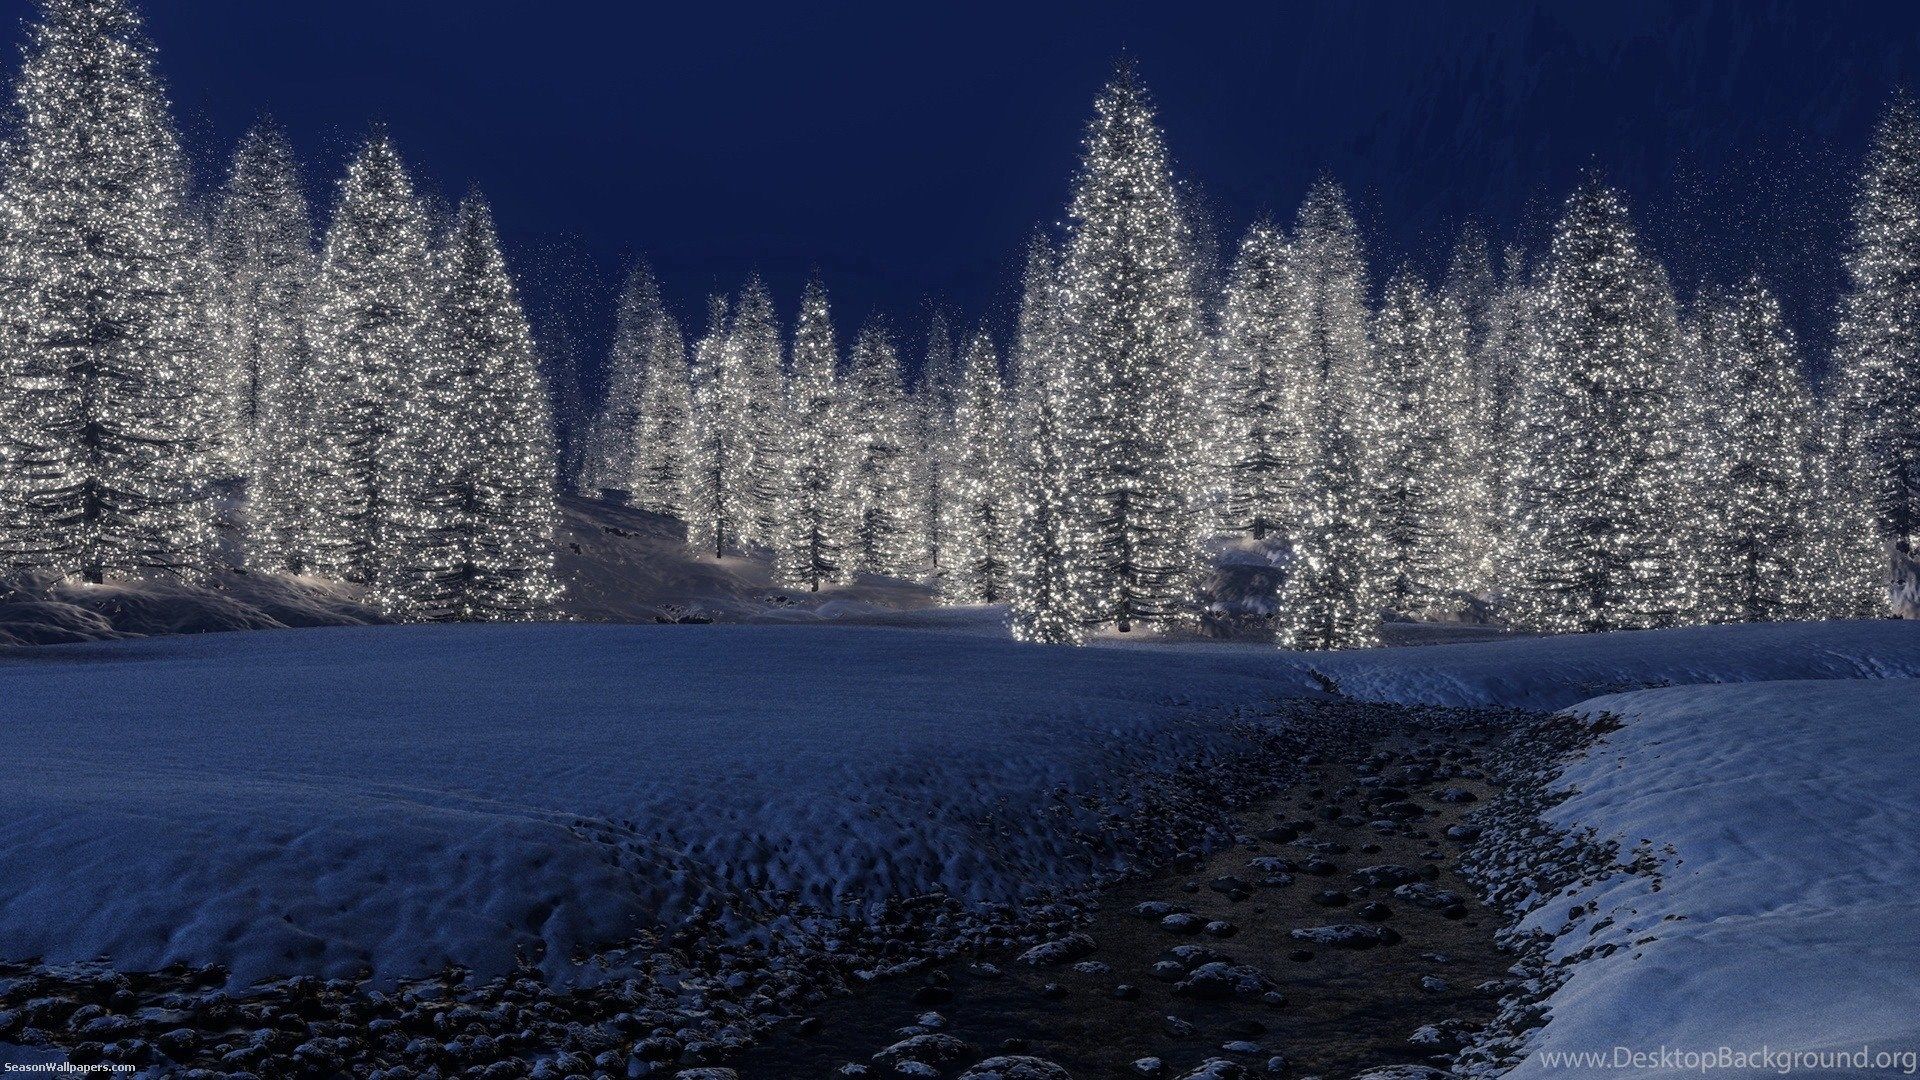 Wallpaper 1920x1080 The Forest Of Glowing Christmas Tree At Night Desktop Background